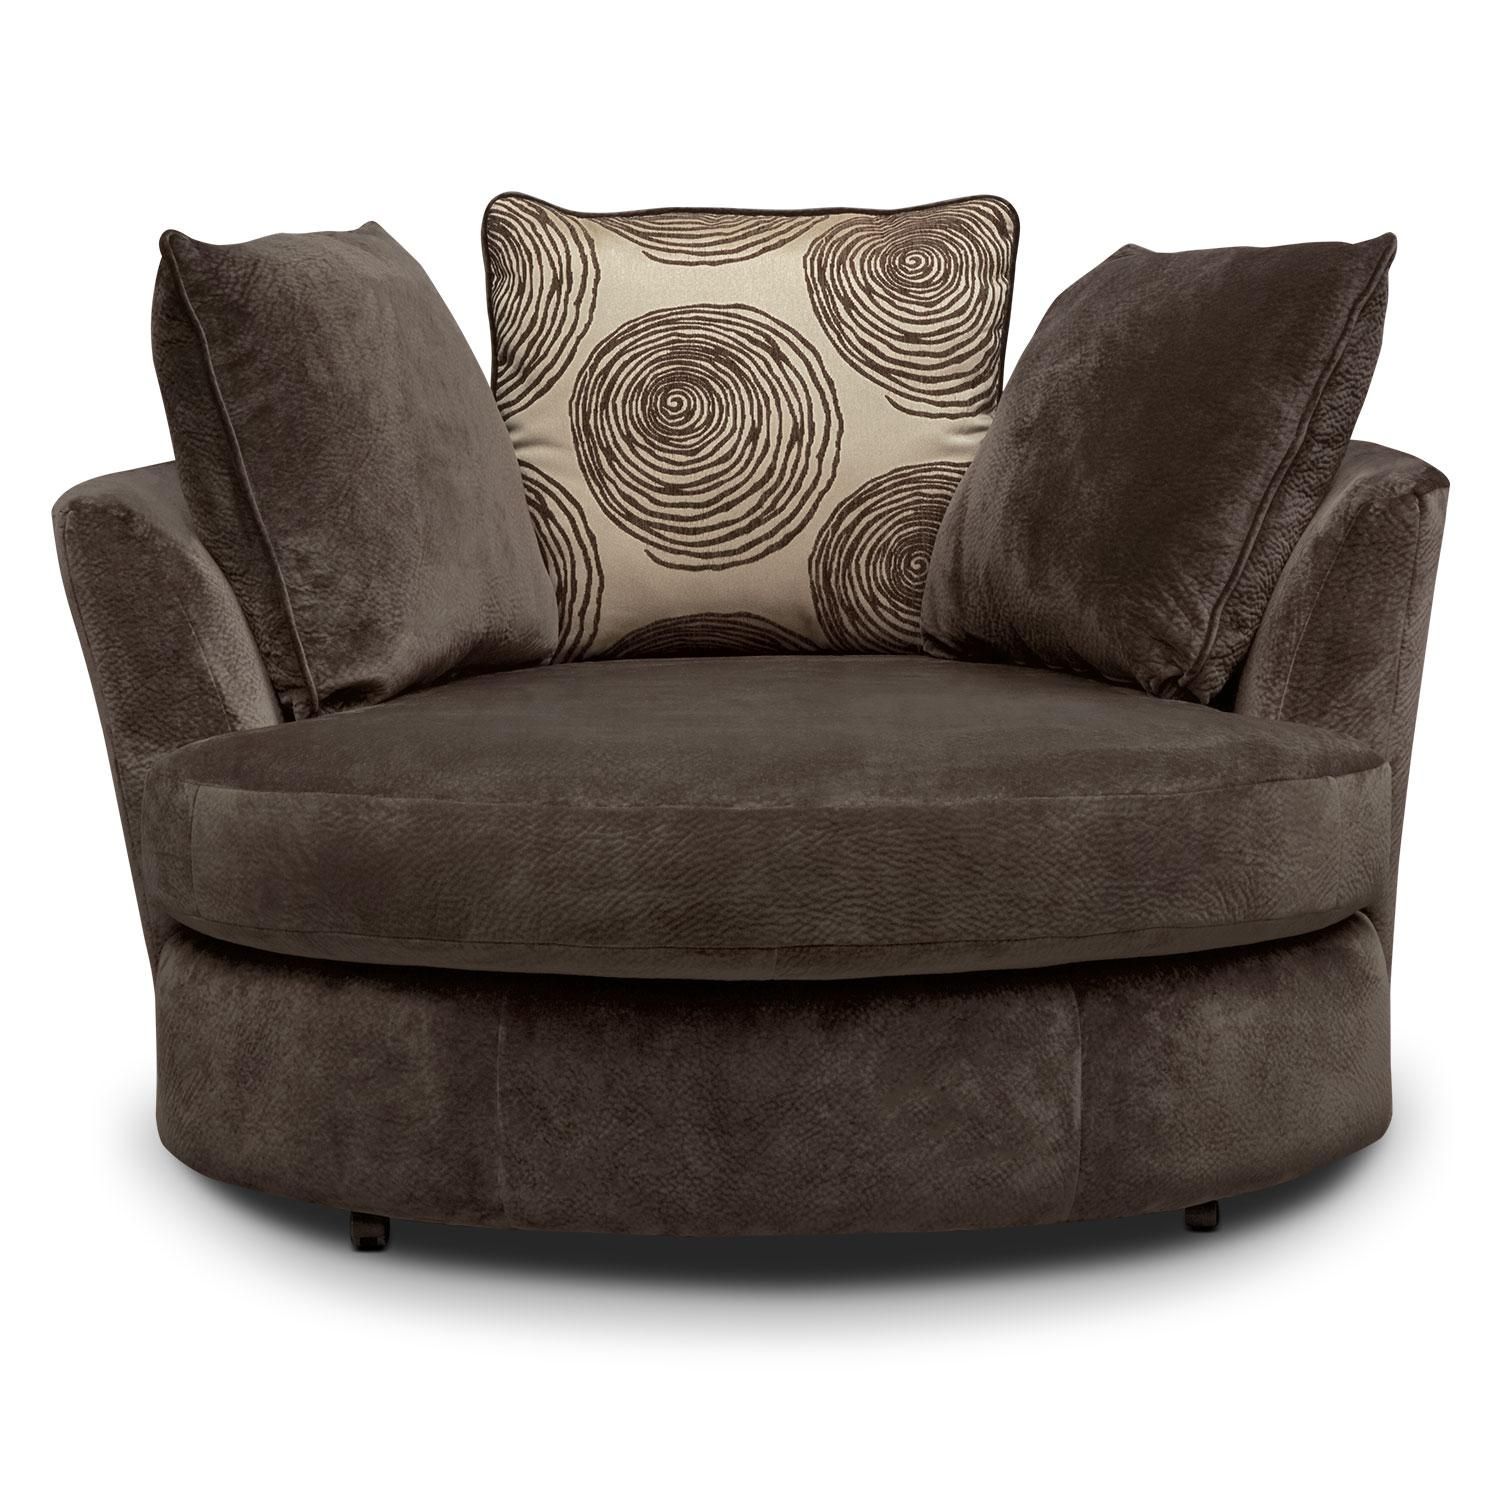 Cordelle Swivel Chair – Chocolate | Value City Furniture Pertaining To Spinning Sofa Chairs (View 1 of 20)